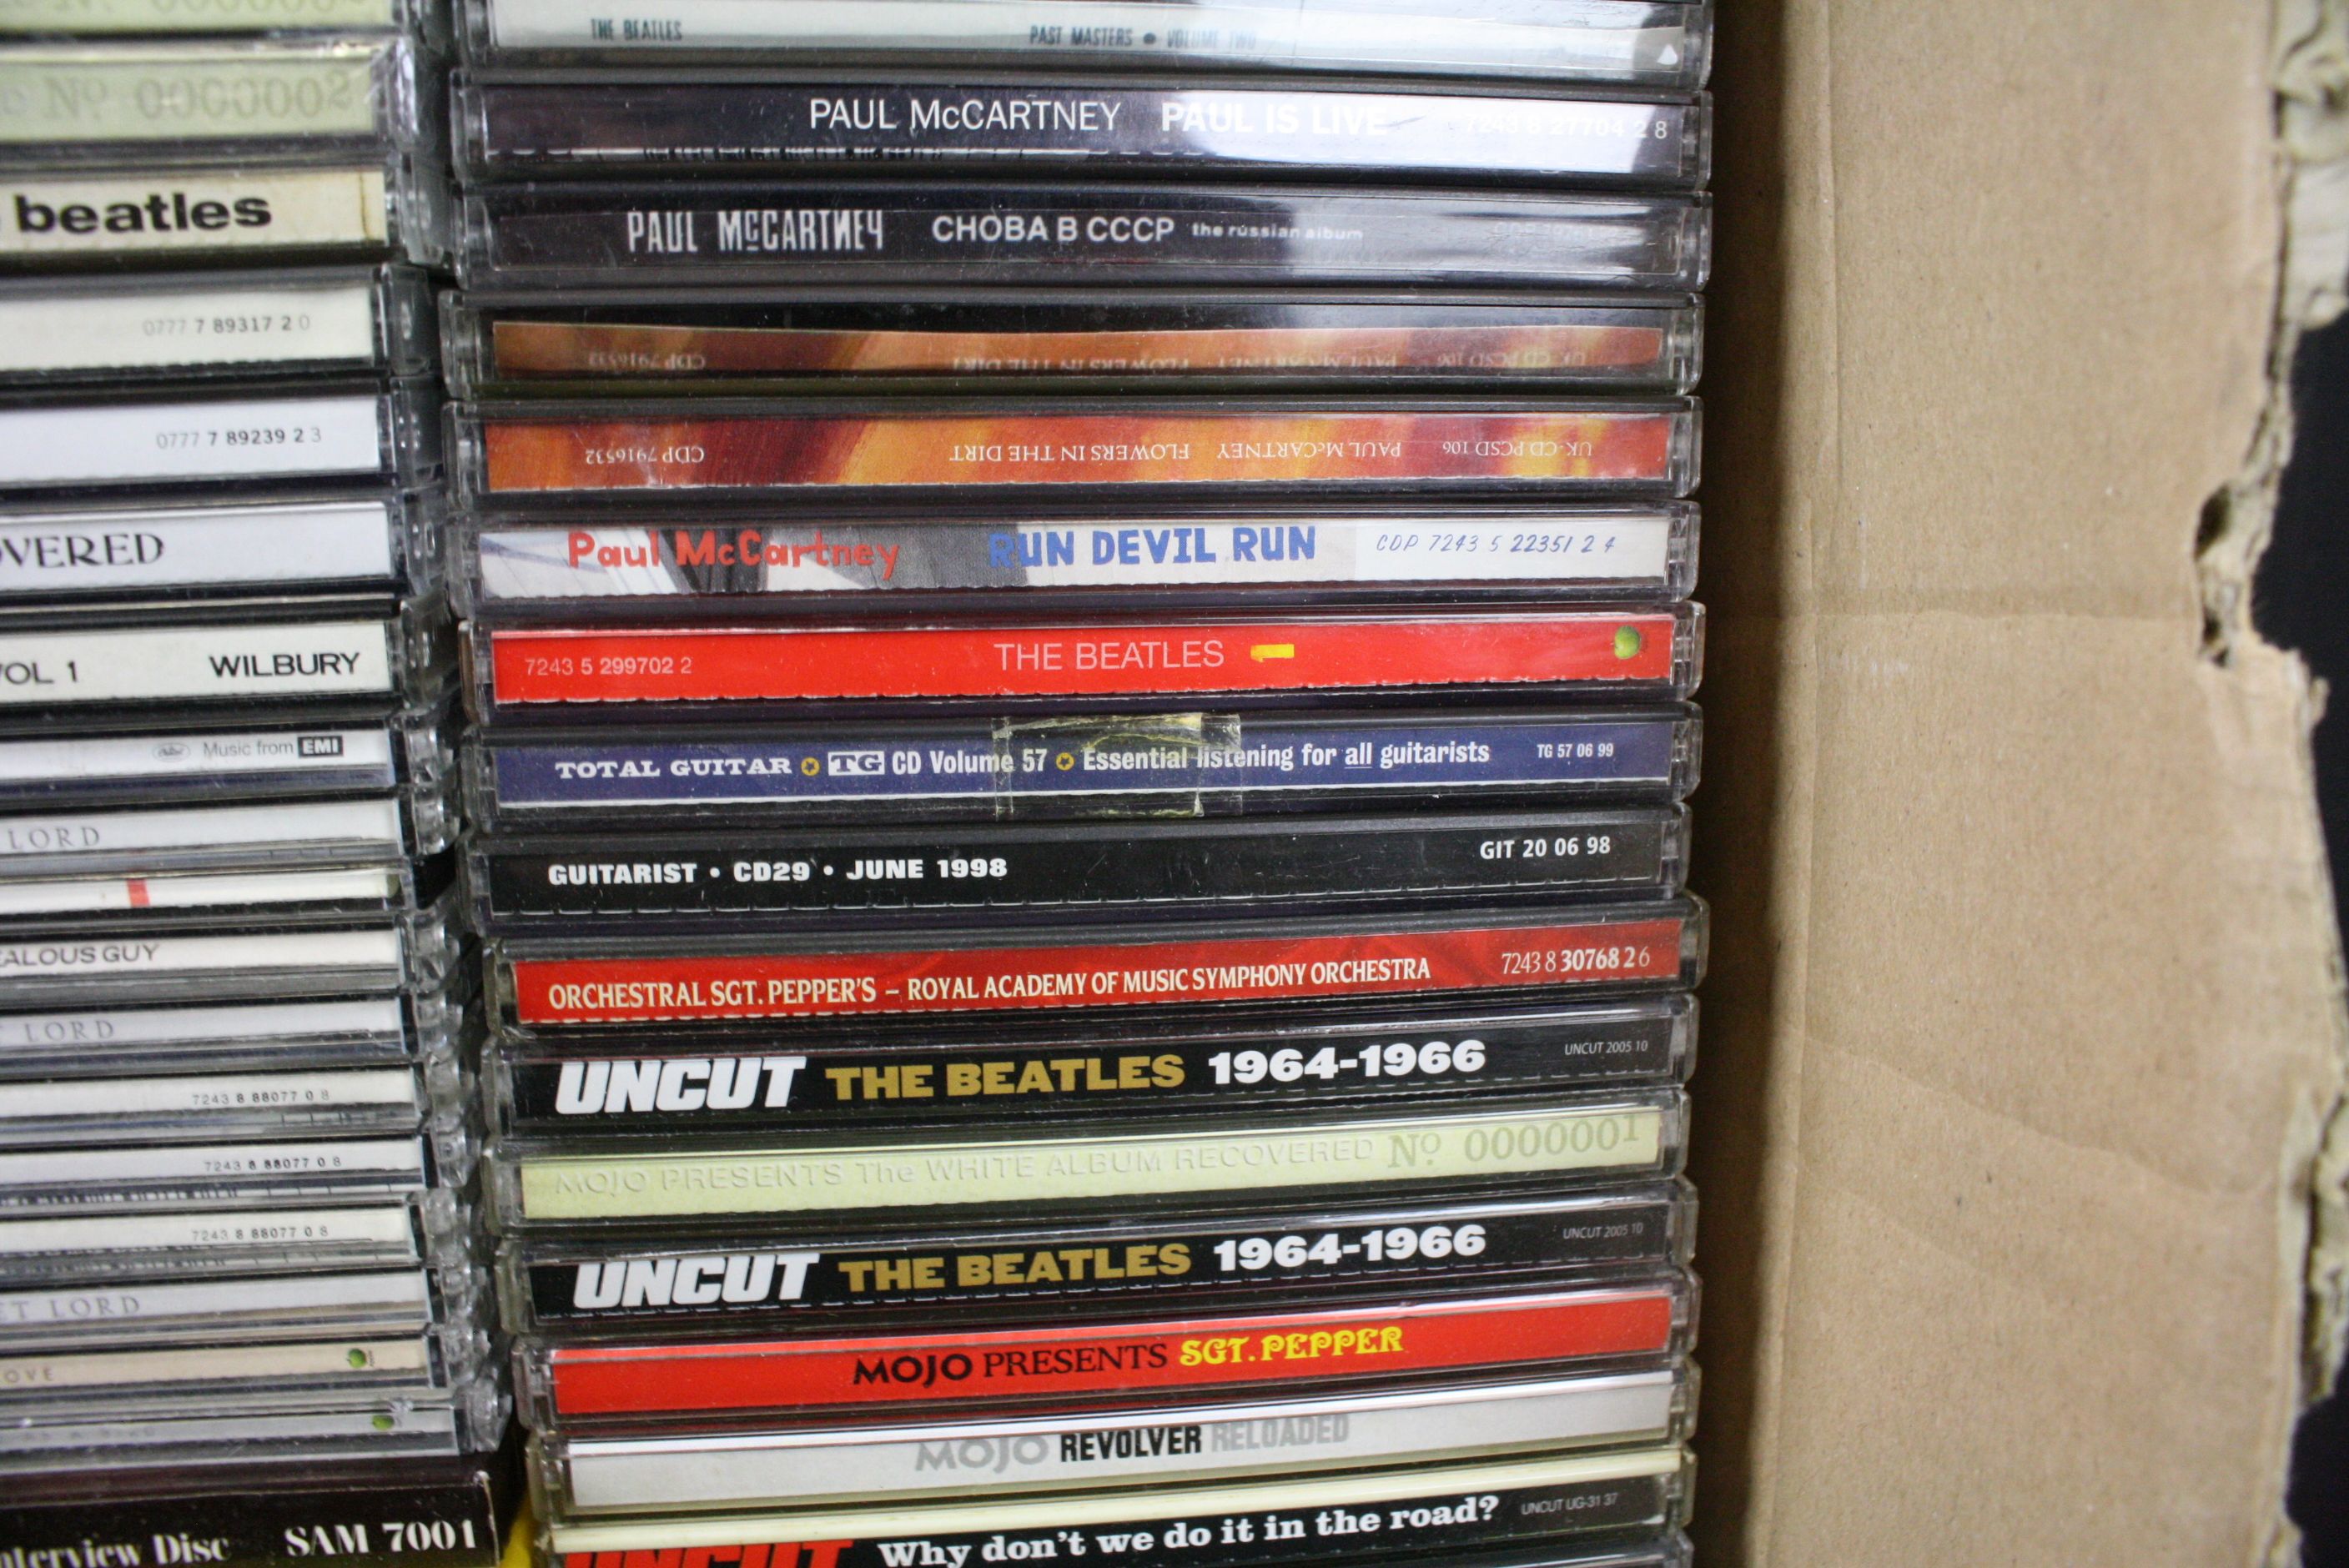 CDs - Over 150 Beatles and related CD's including imports, box sets, singles, giveaways, private - Image 15 of 18